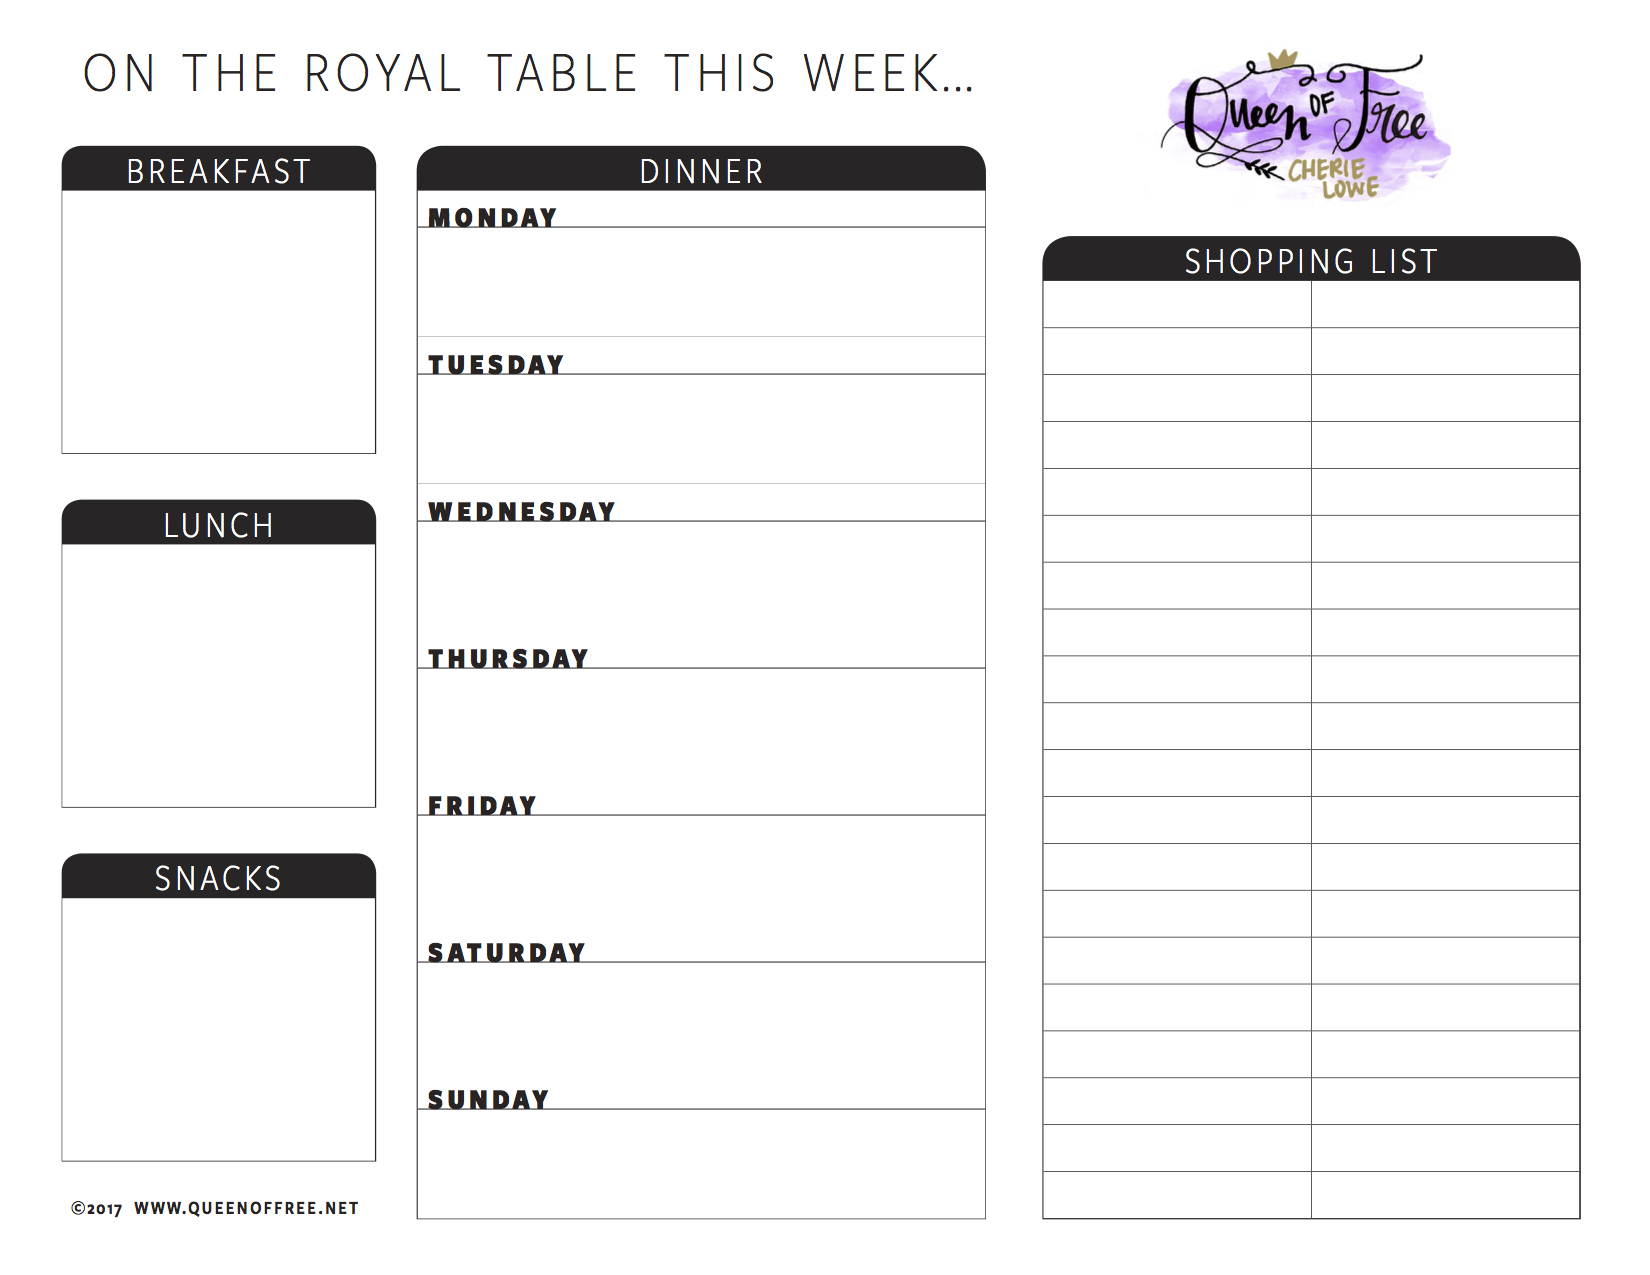 All New: Free Printable Meal Planner You Can Edit - Queen Of Free - Free Printable Menu Planner